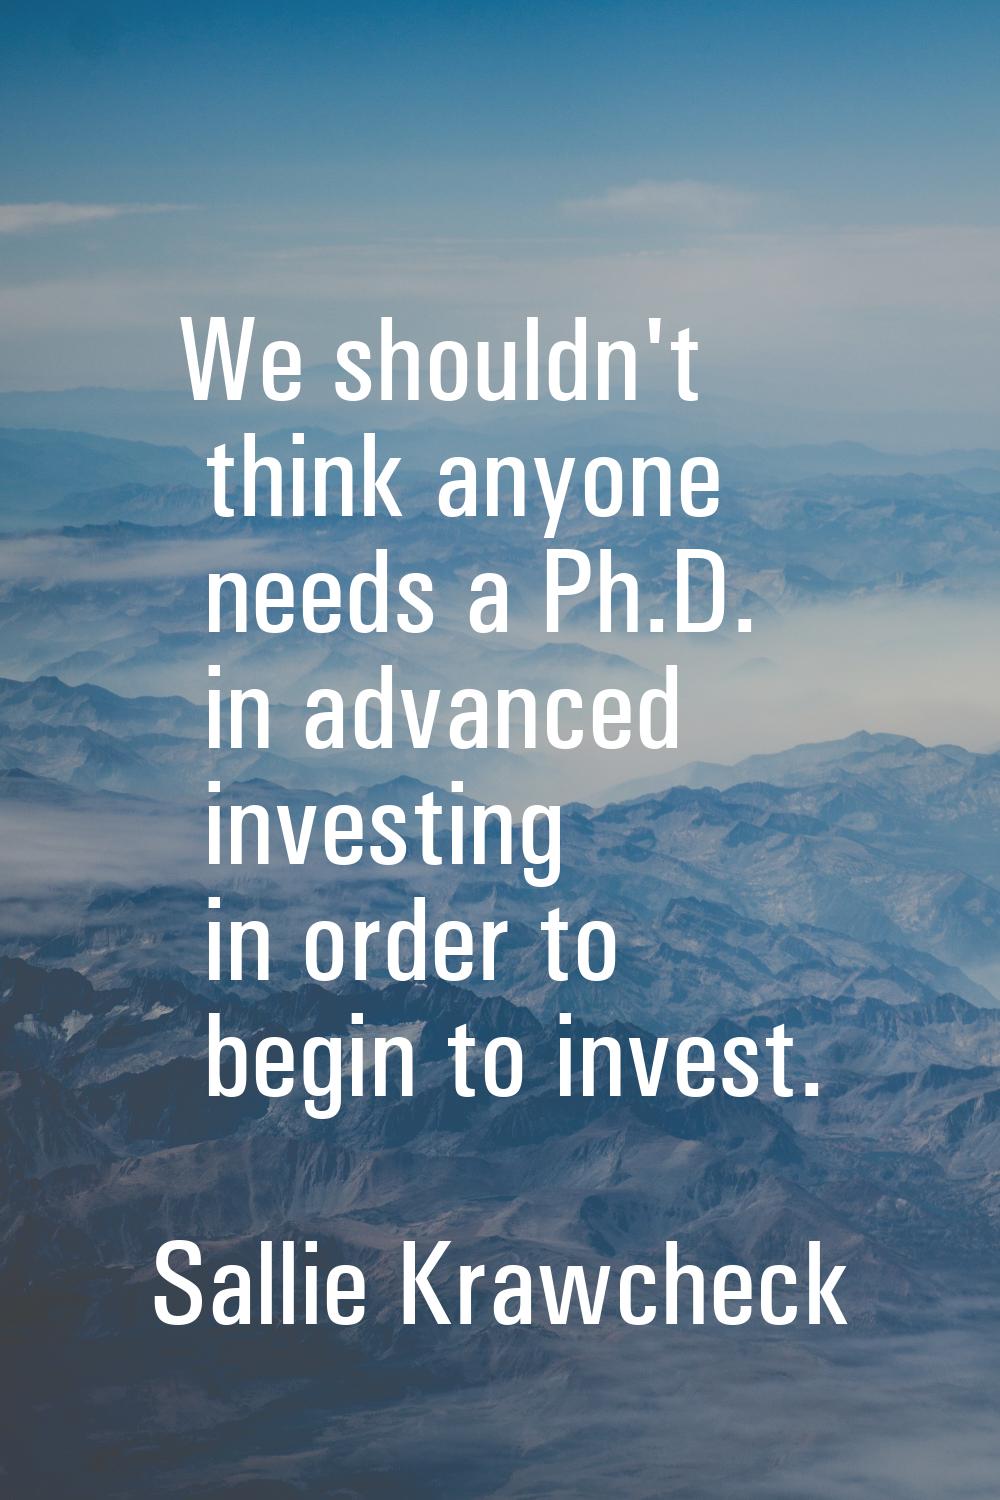 We shouldn't think anyone needs a Ph.D. in advanced investing in order to begin to invest.